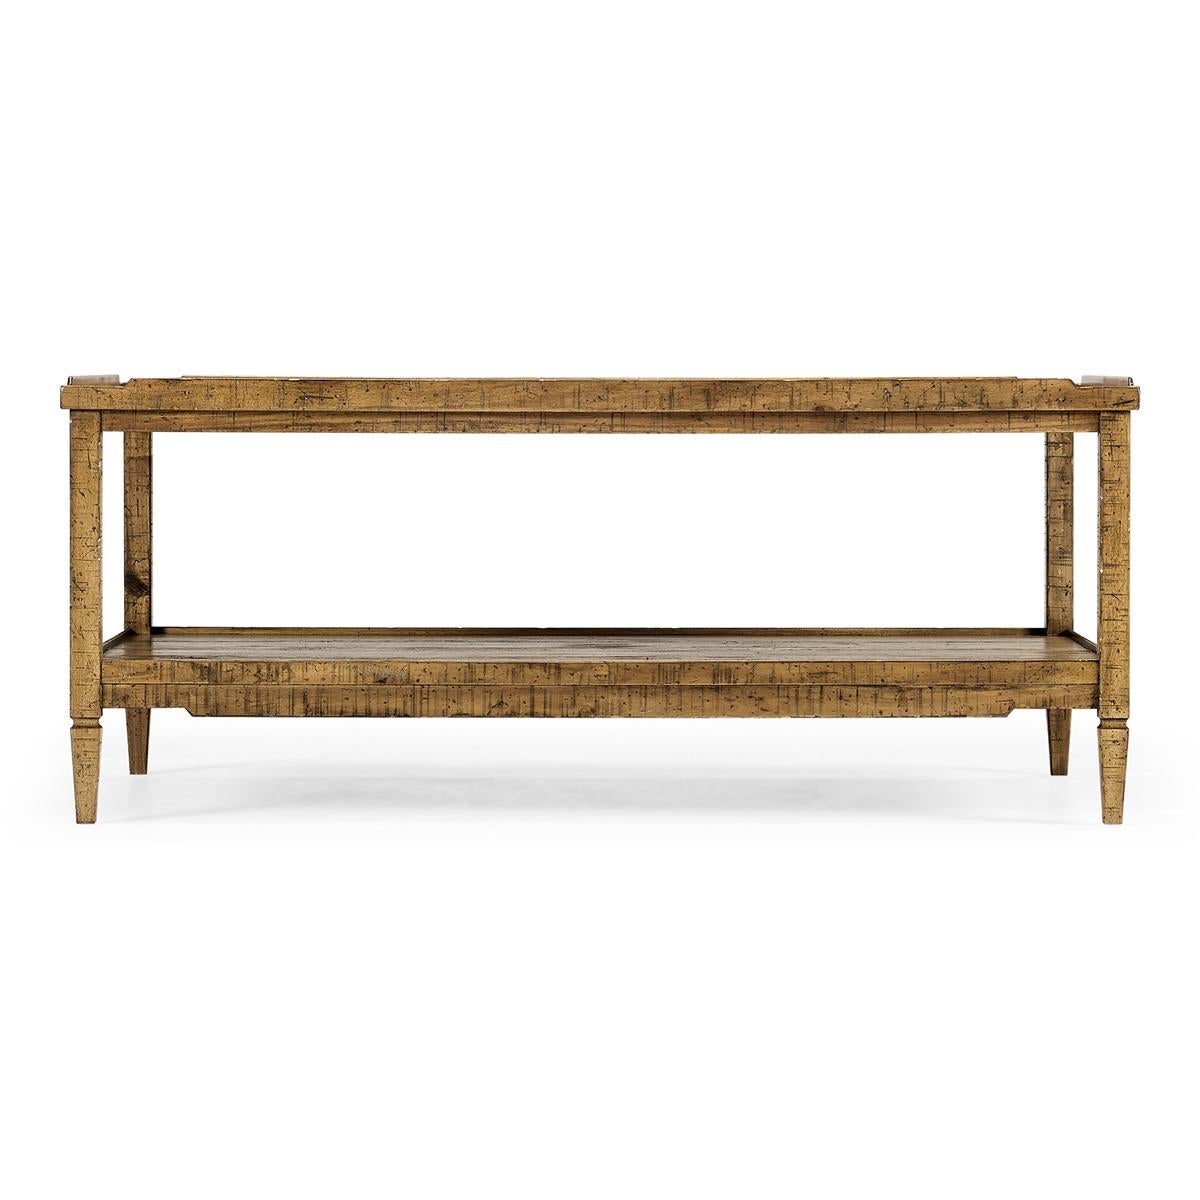 French Rustic country coffee table in a medium driftwood finish with a wooden gallery, square tapered legs and a lower tier shelf.

Dimensions: 48